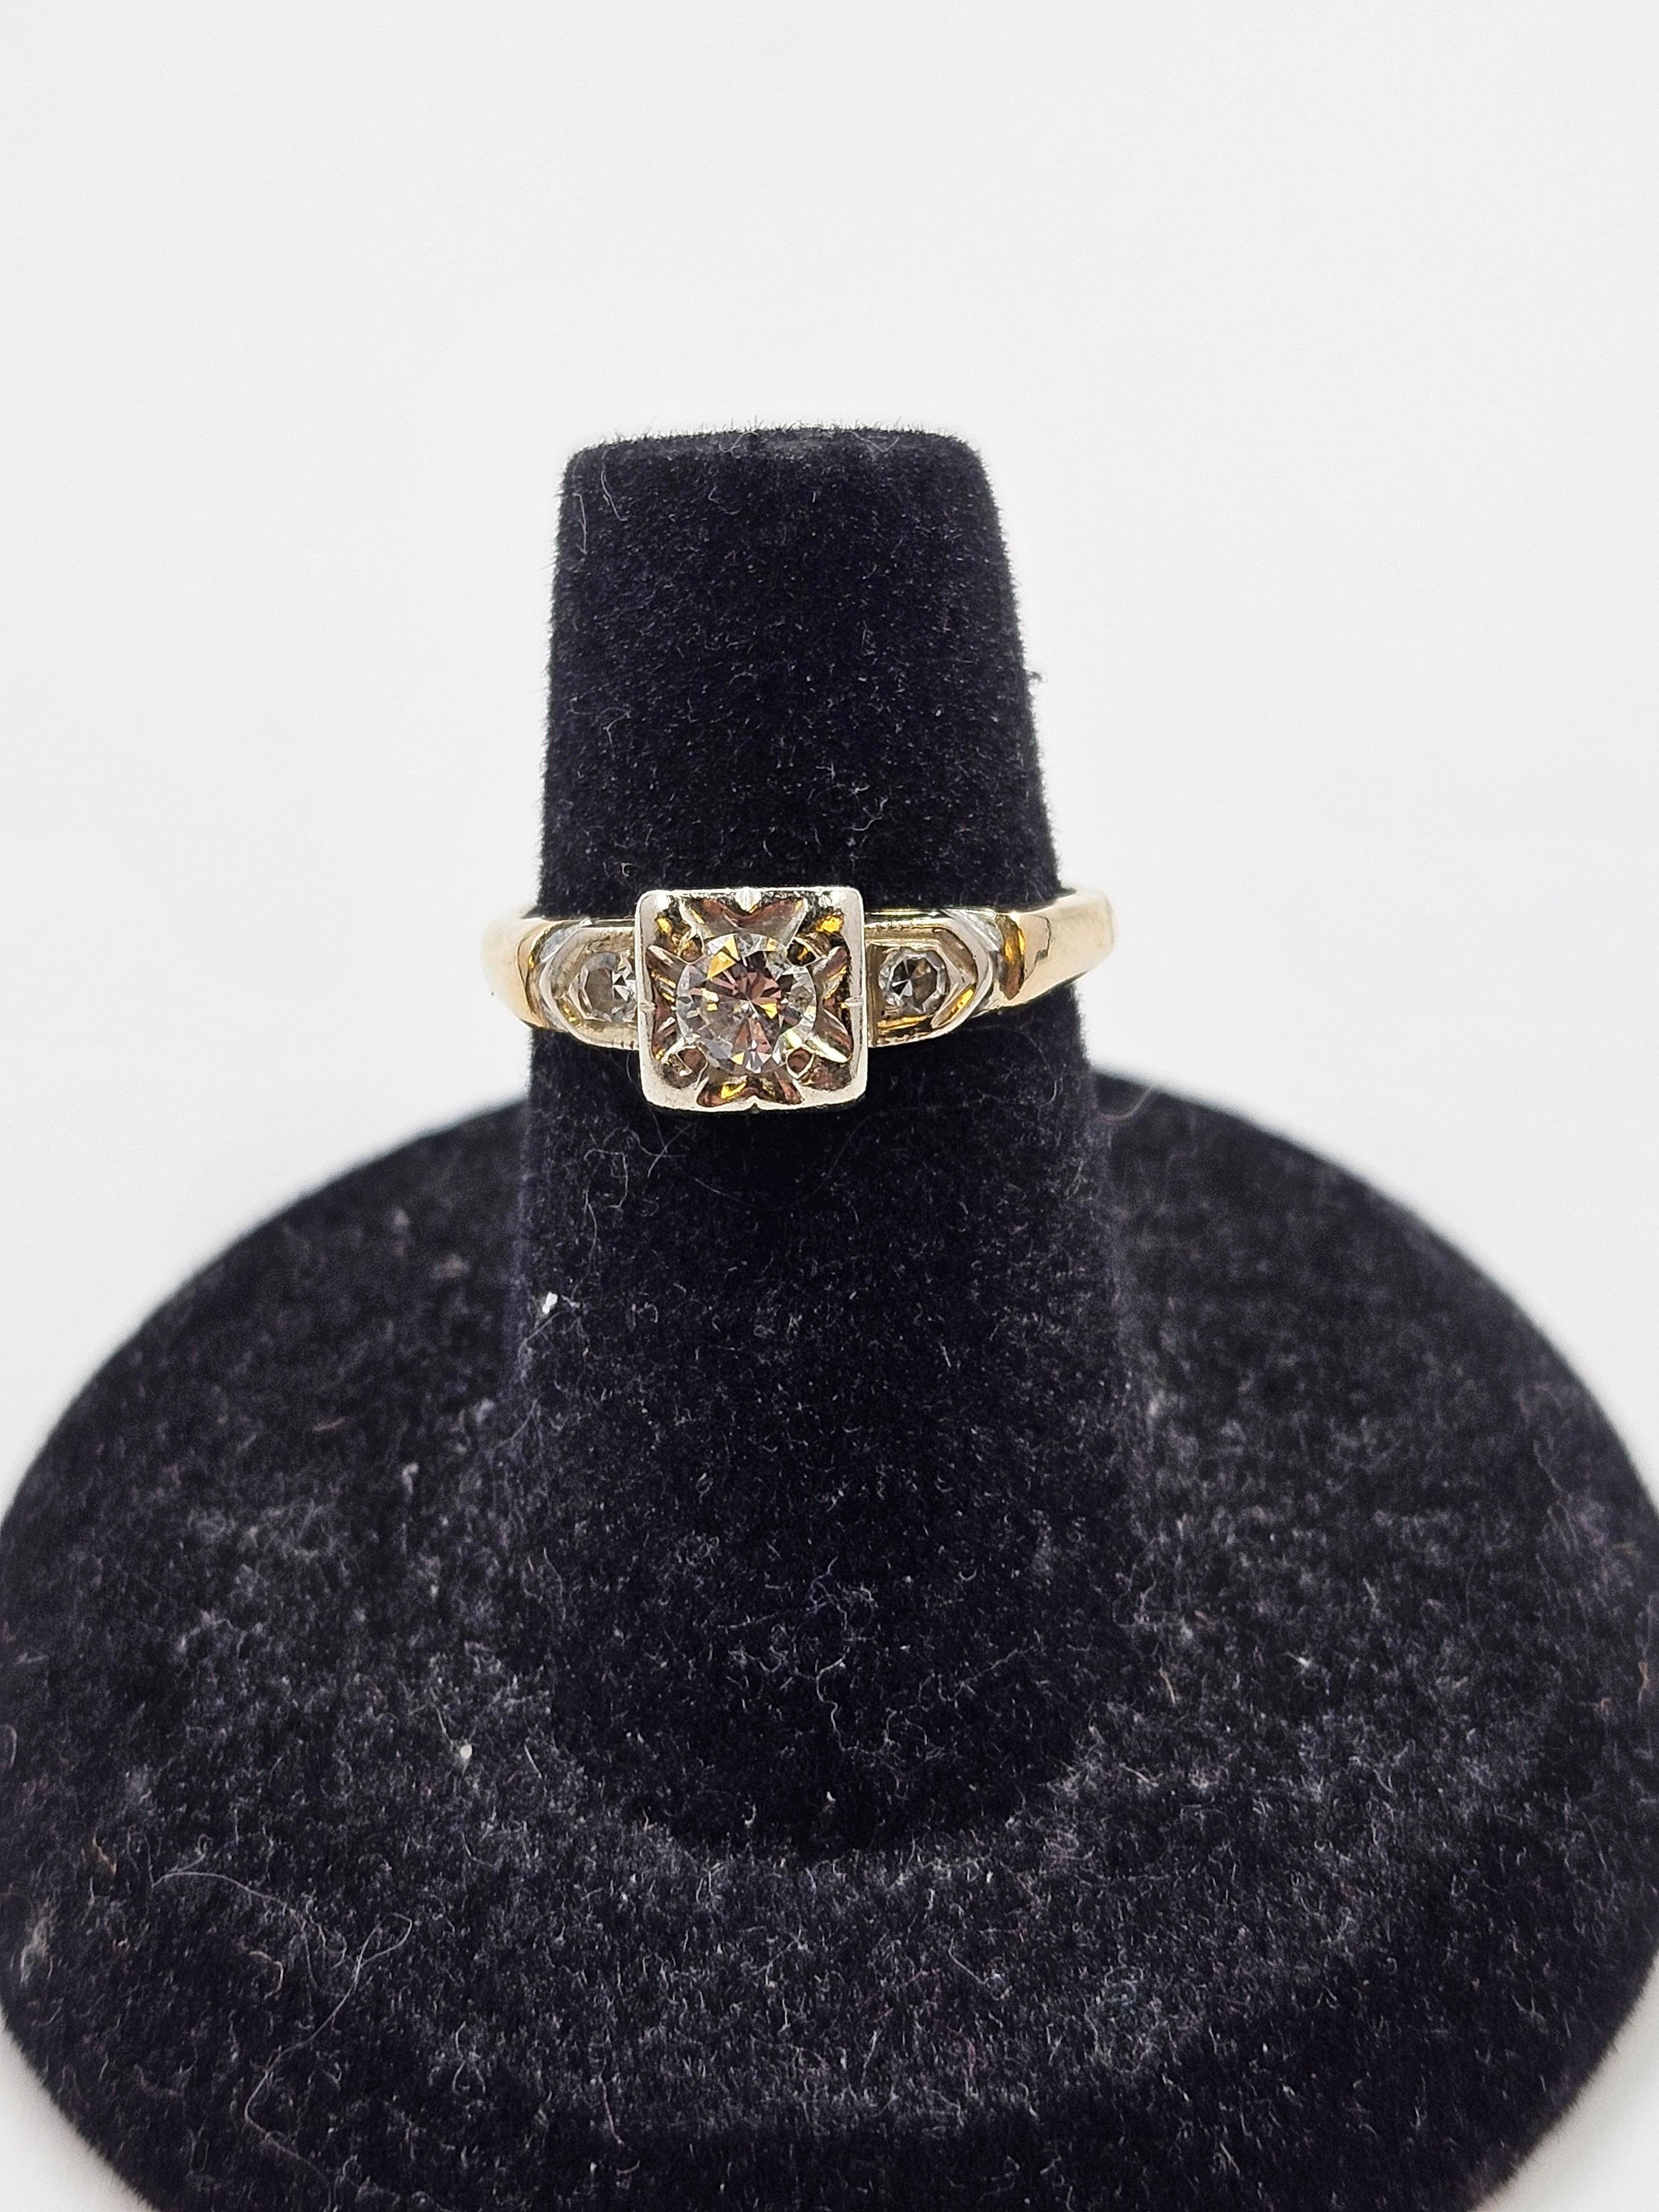 1930's 14K yellow and white gold diamond engagement ring. Head is white gold and band is yellow gold. This vintage diamond engagement ring features a 4mm round cut center stone with 2mm shoulder set round cut diamonds. The ring size is 5.5. Total